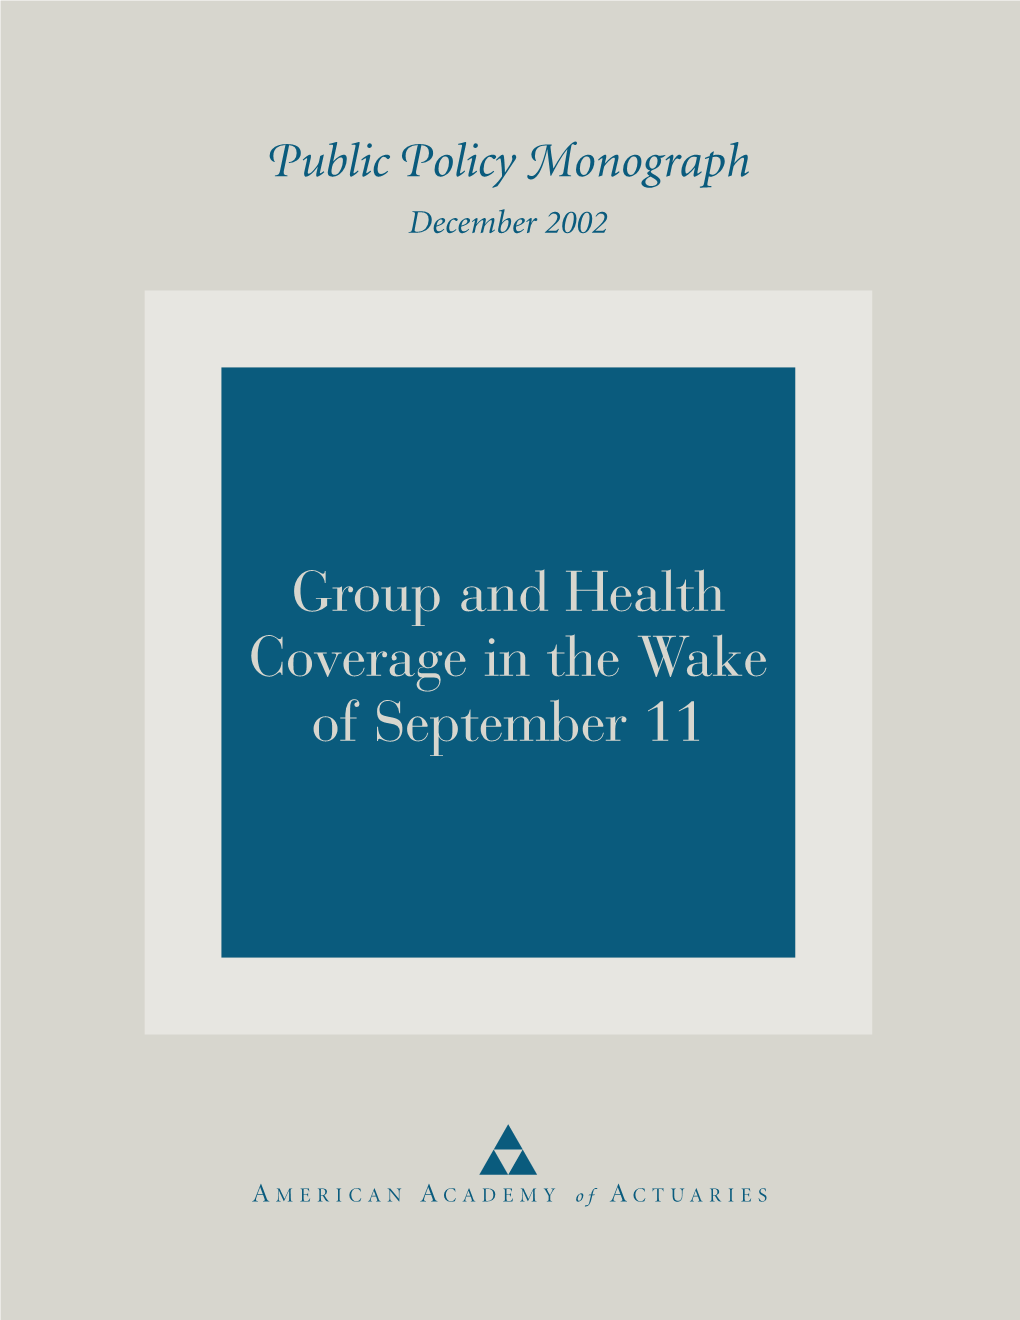 Group and Health Coverage in the Wake of September 11